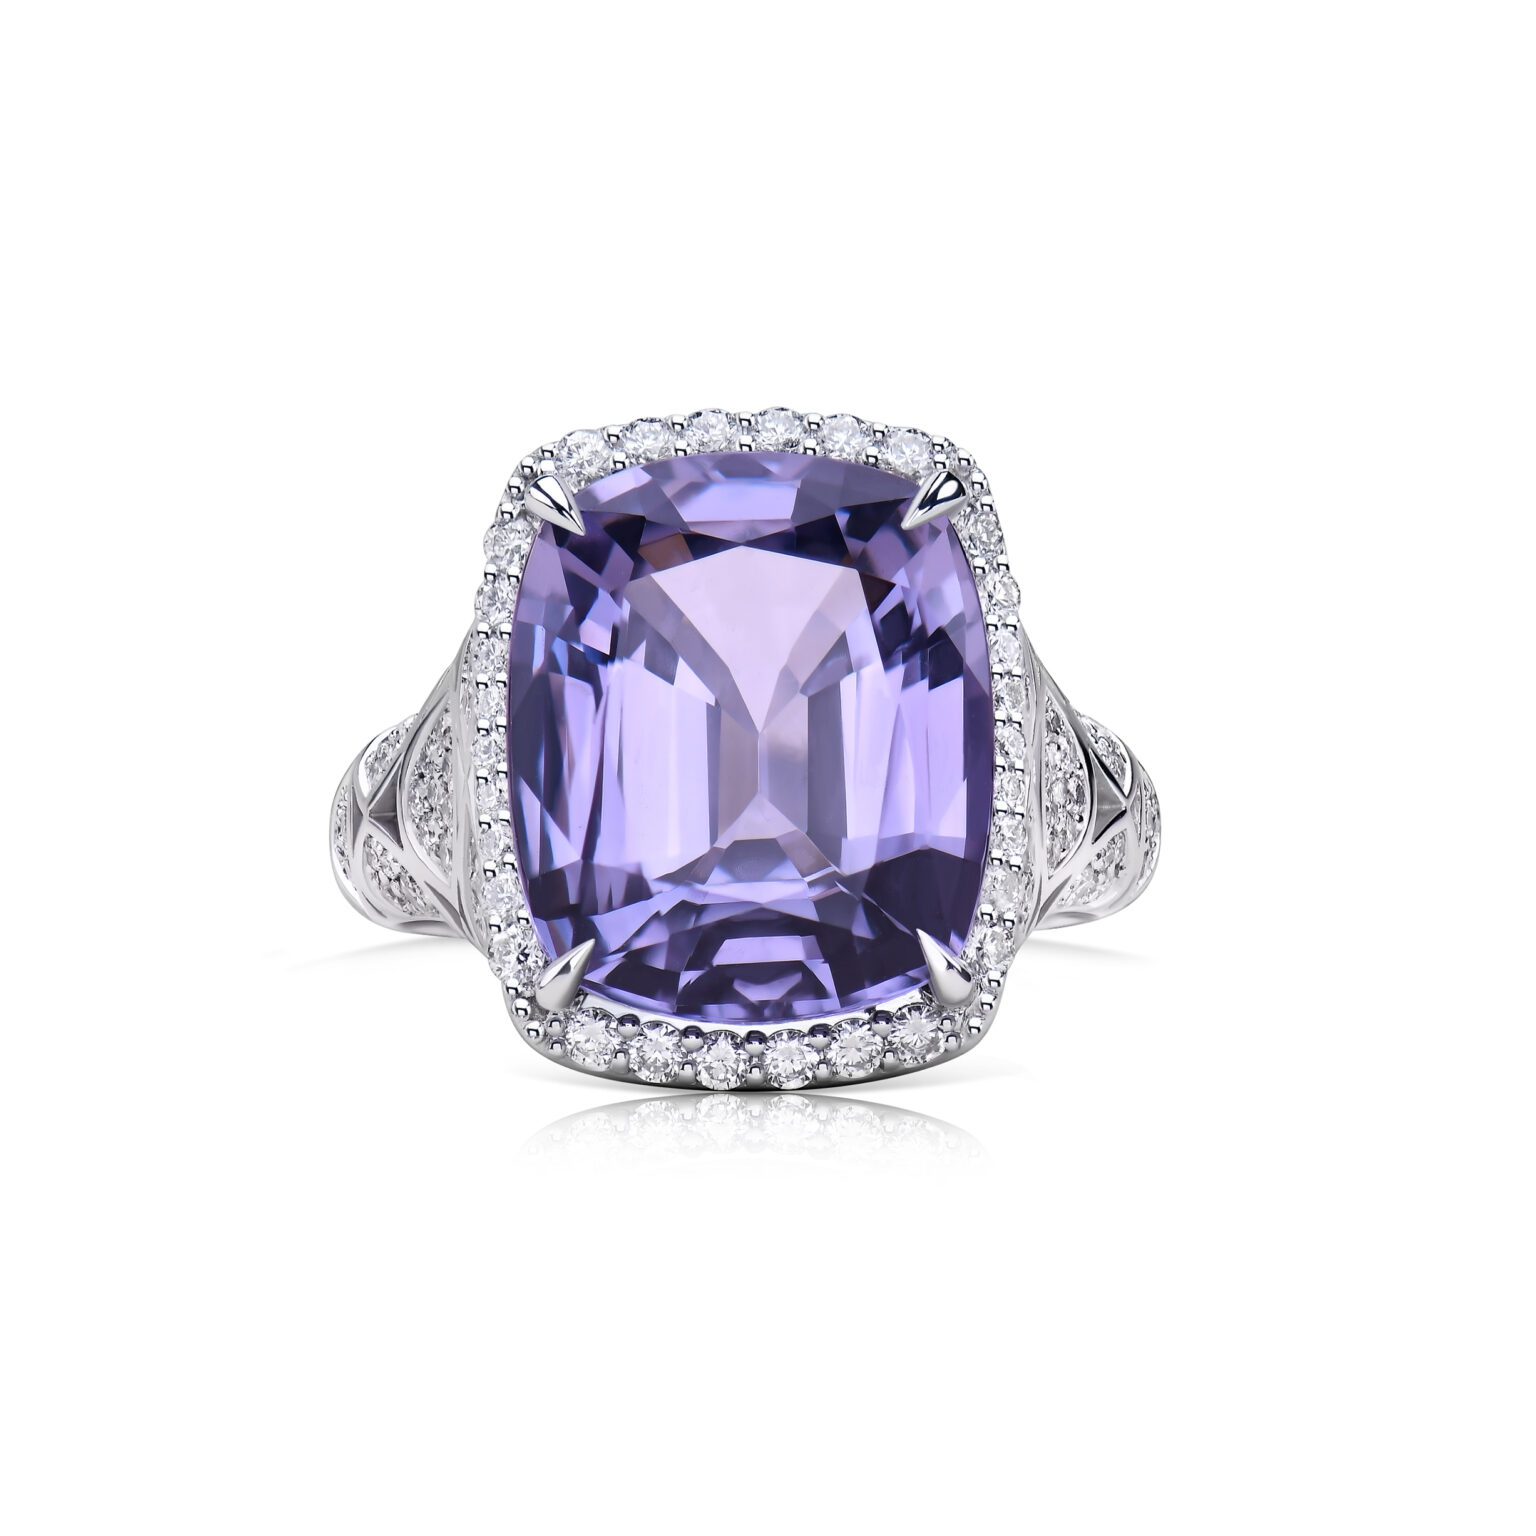 7.18 ct Cushion Cut Spinel and Diamond Ring